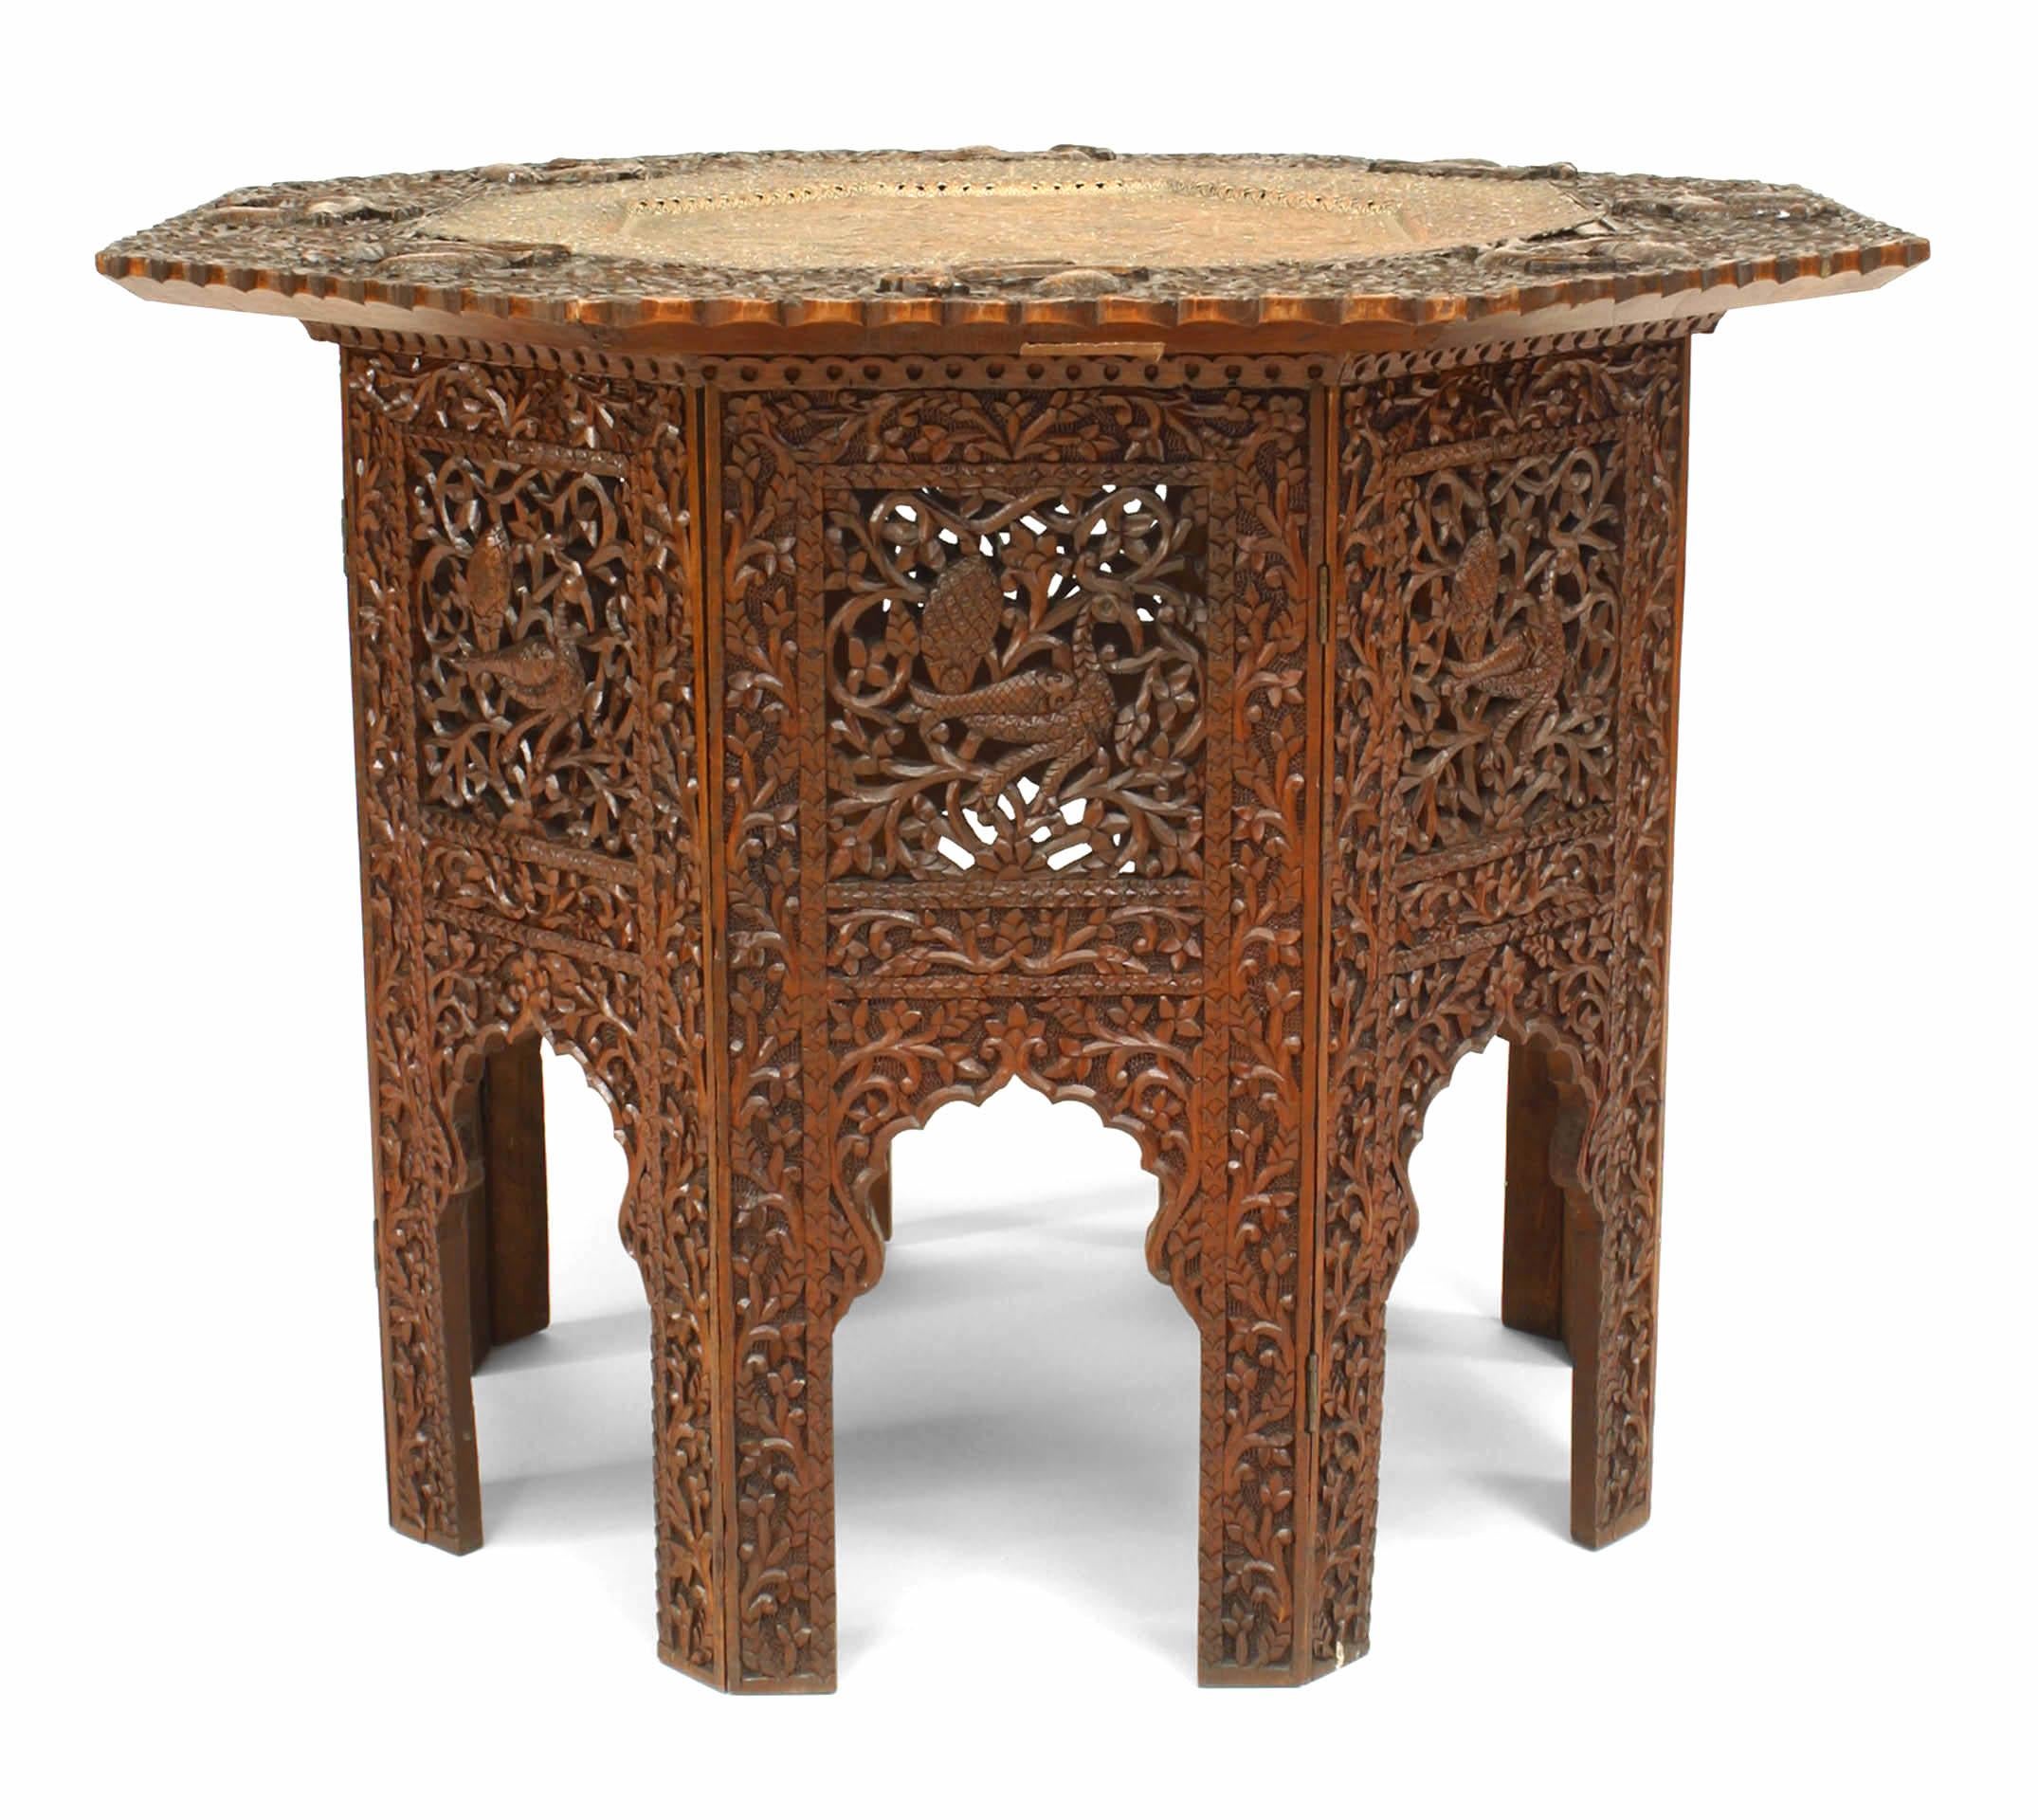 19th century Asian Burmese style walnut carved filigree octagonal table with floral and bird design and scalloped edge with inset copper tray top.